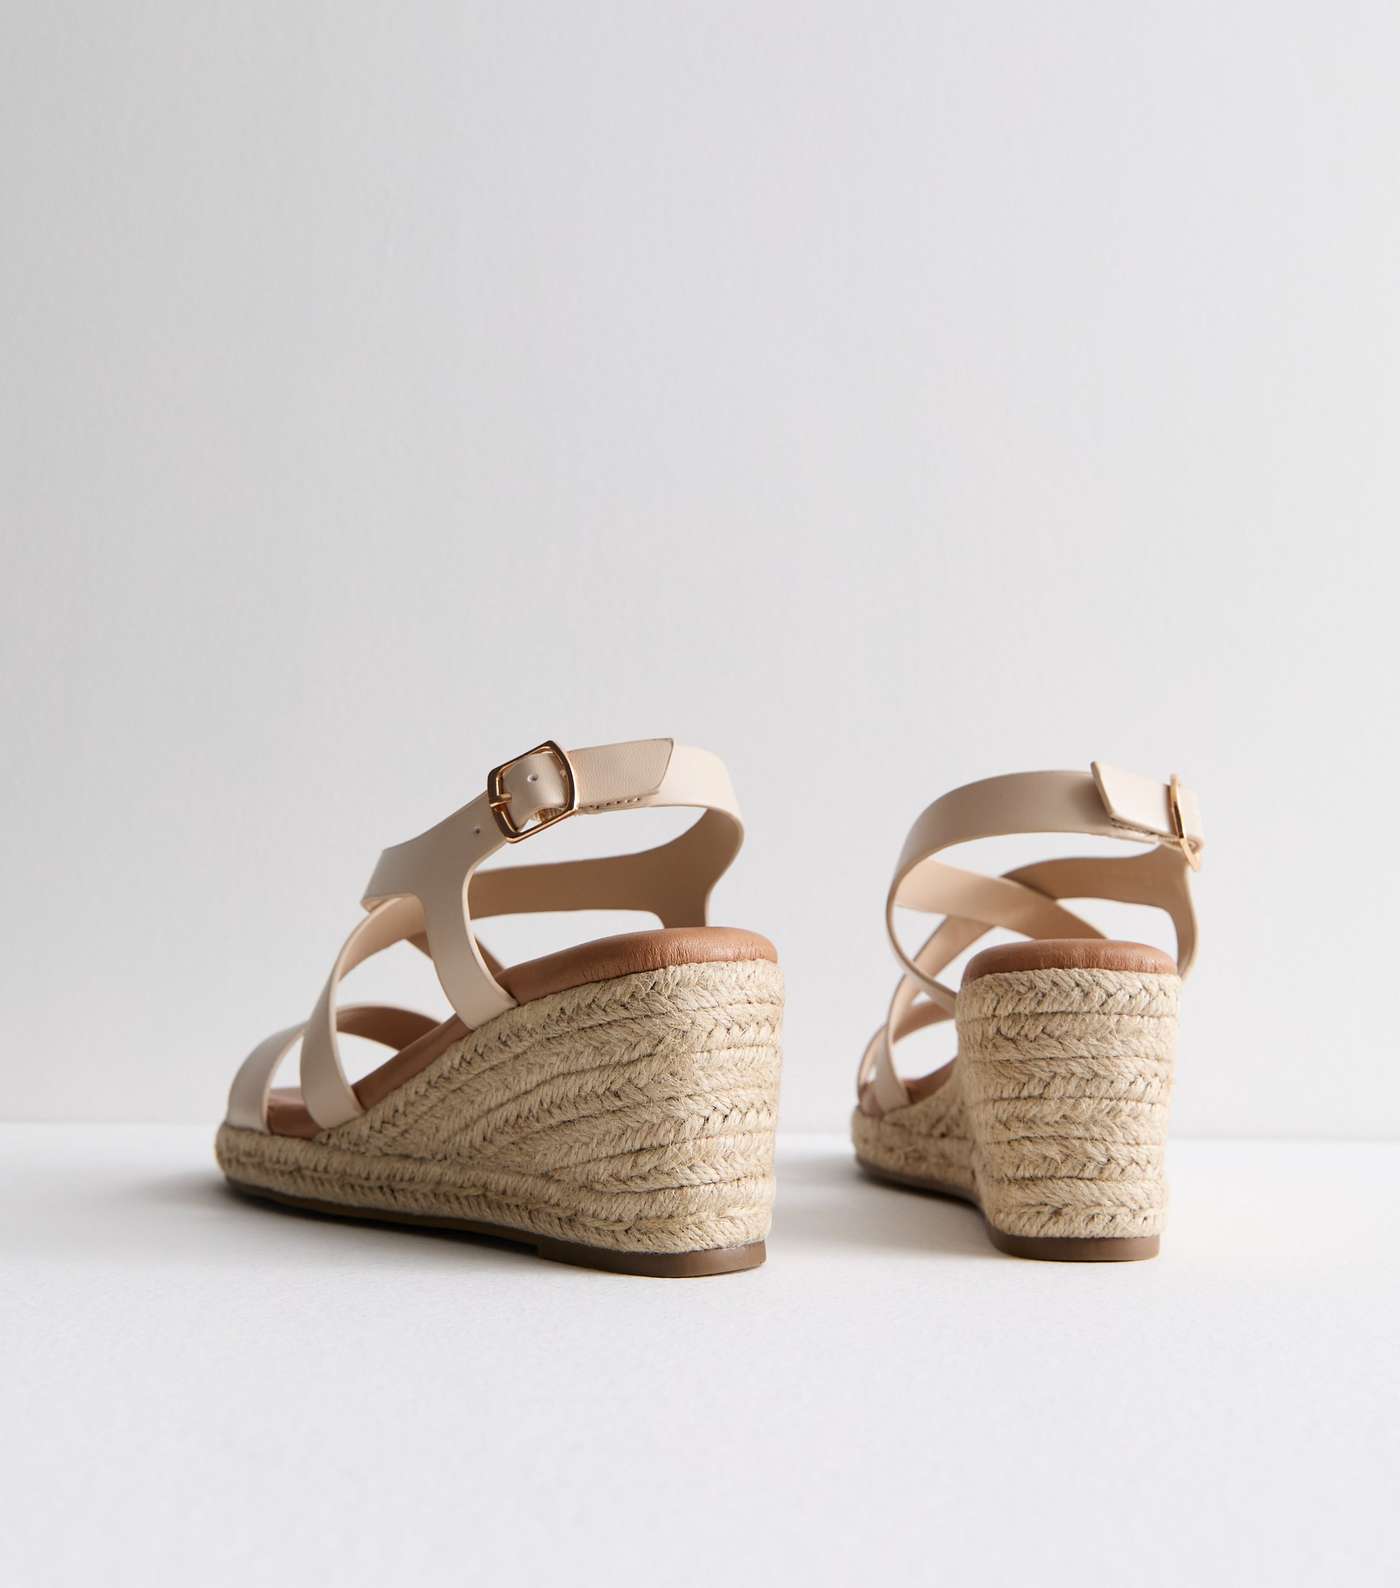 Off White Leather-Look Espadrille Wedge Heel Sandals Image 4